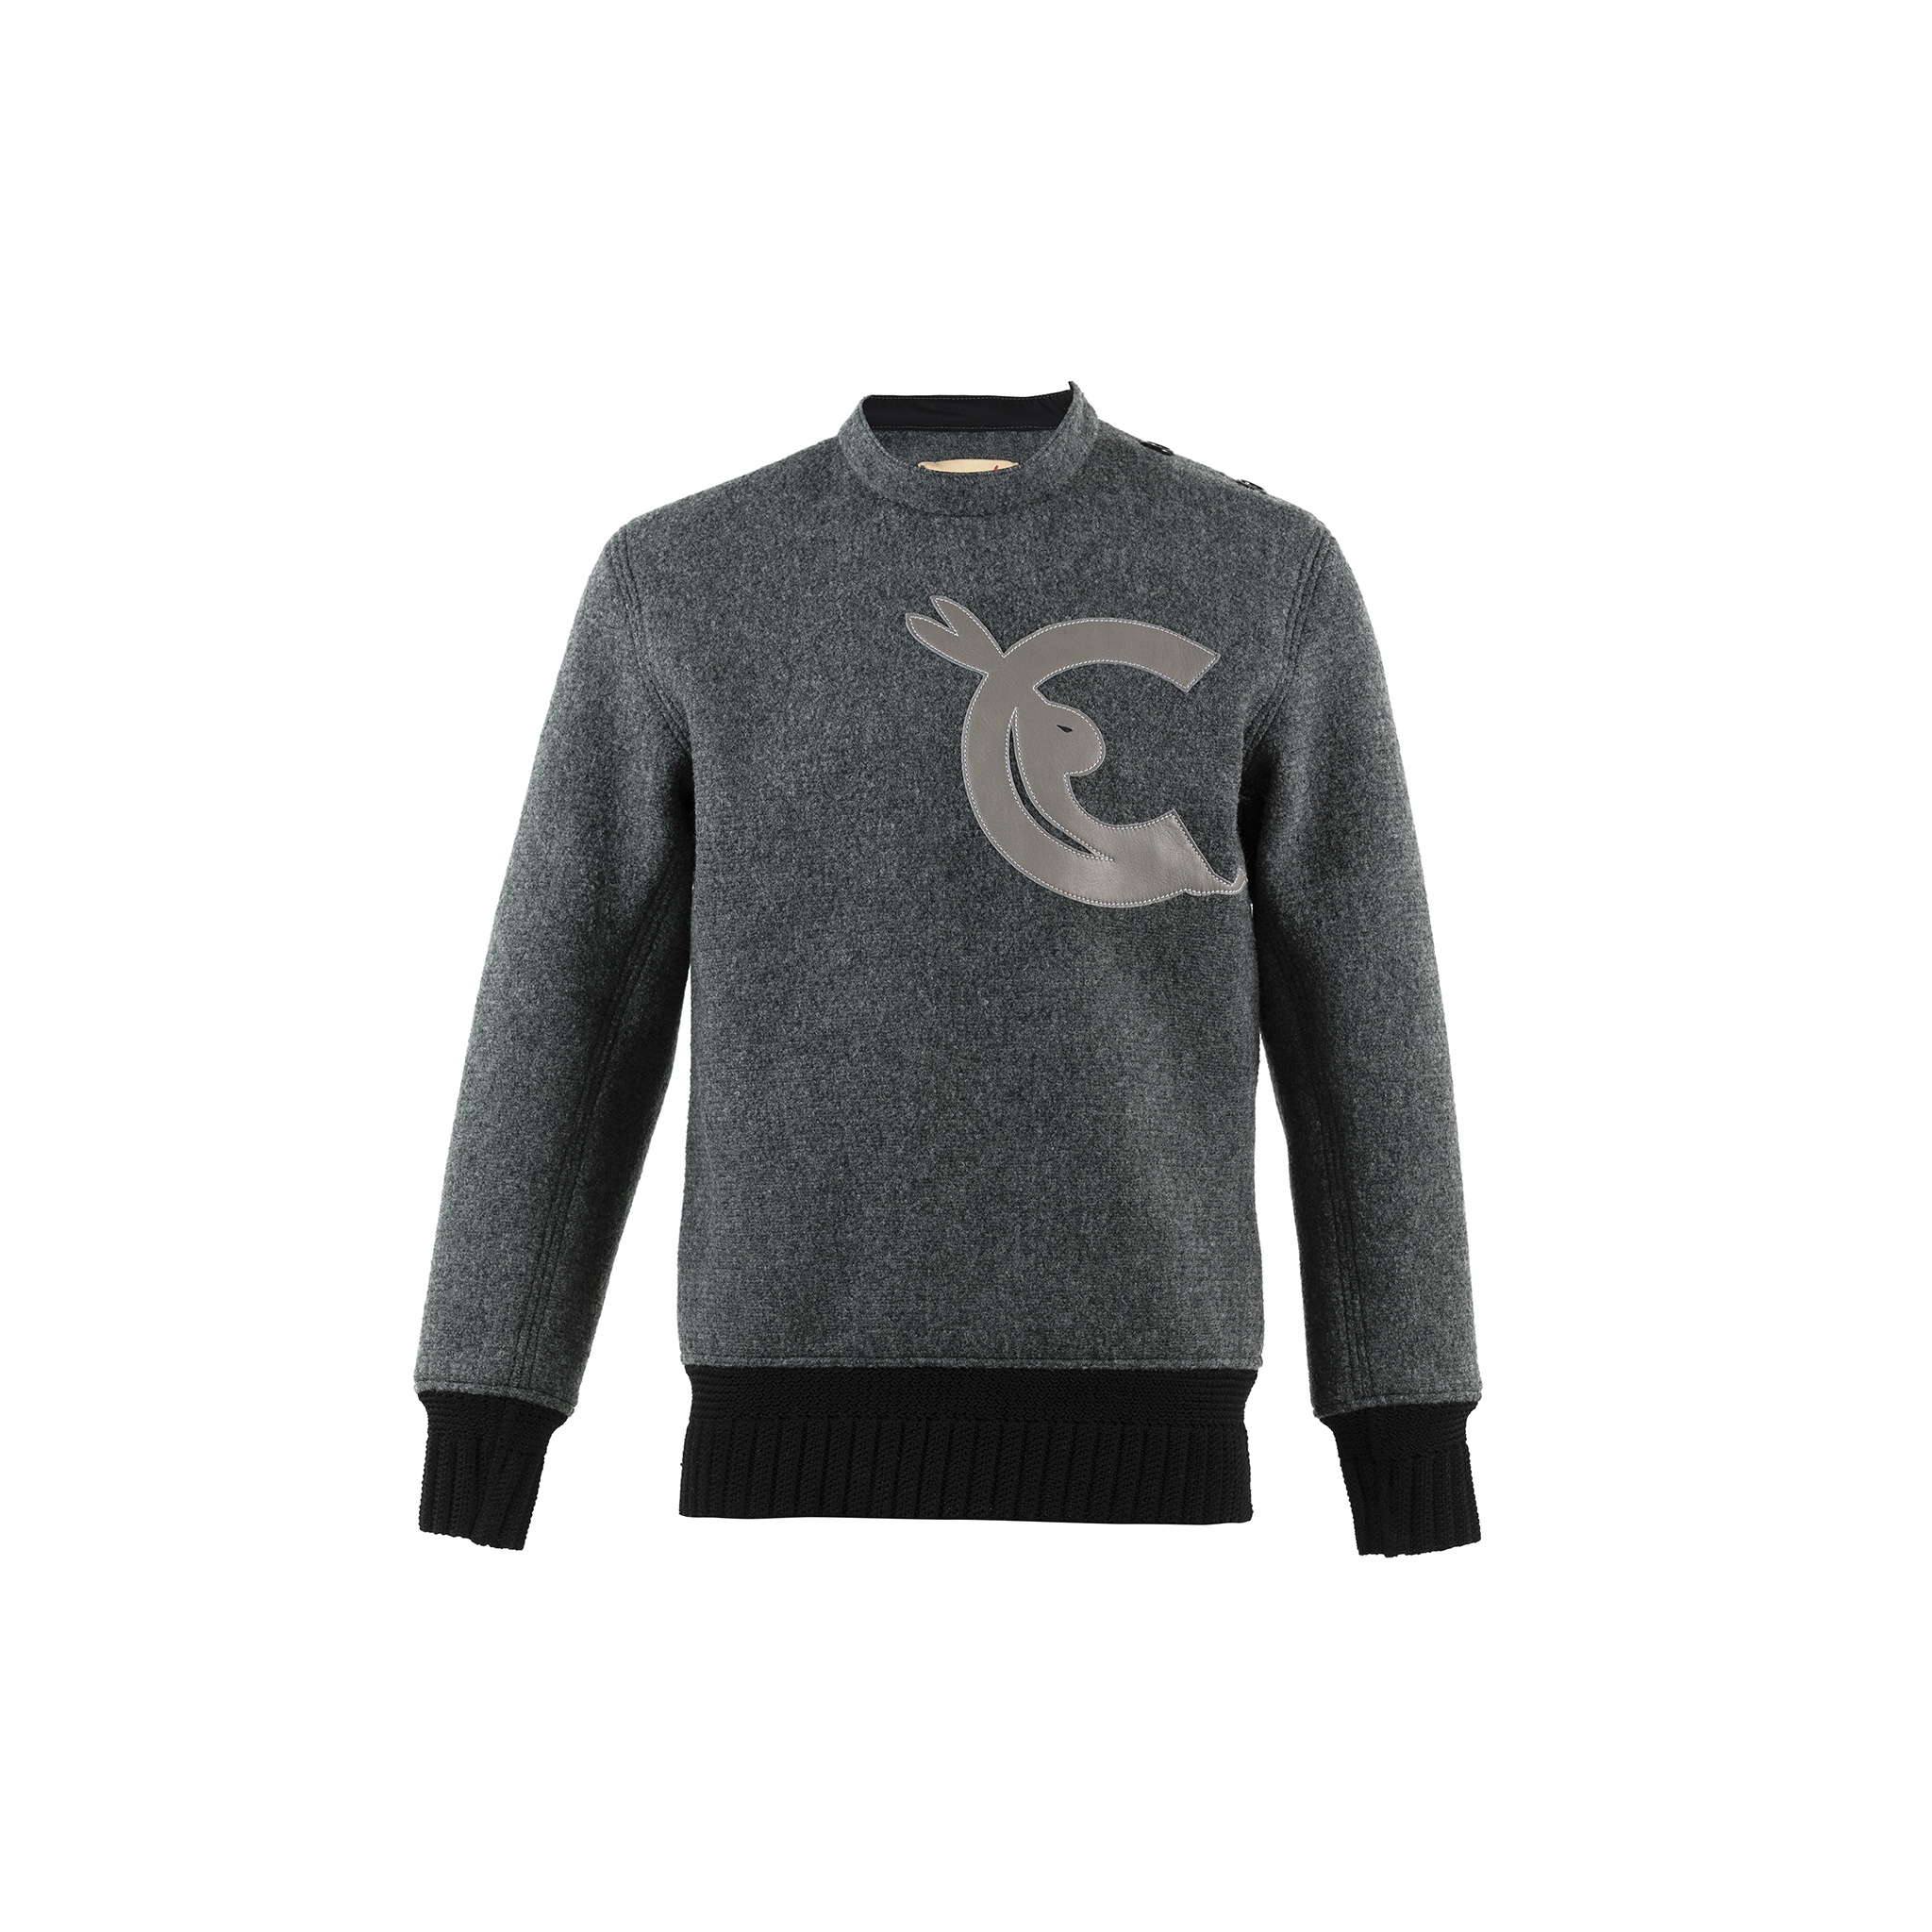 Rabbit C Jumper N°1 - Merino wool and glossy leather - Charcoal grey color